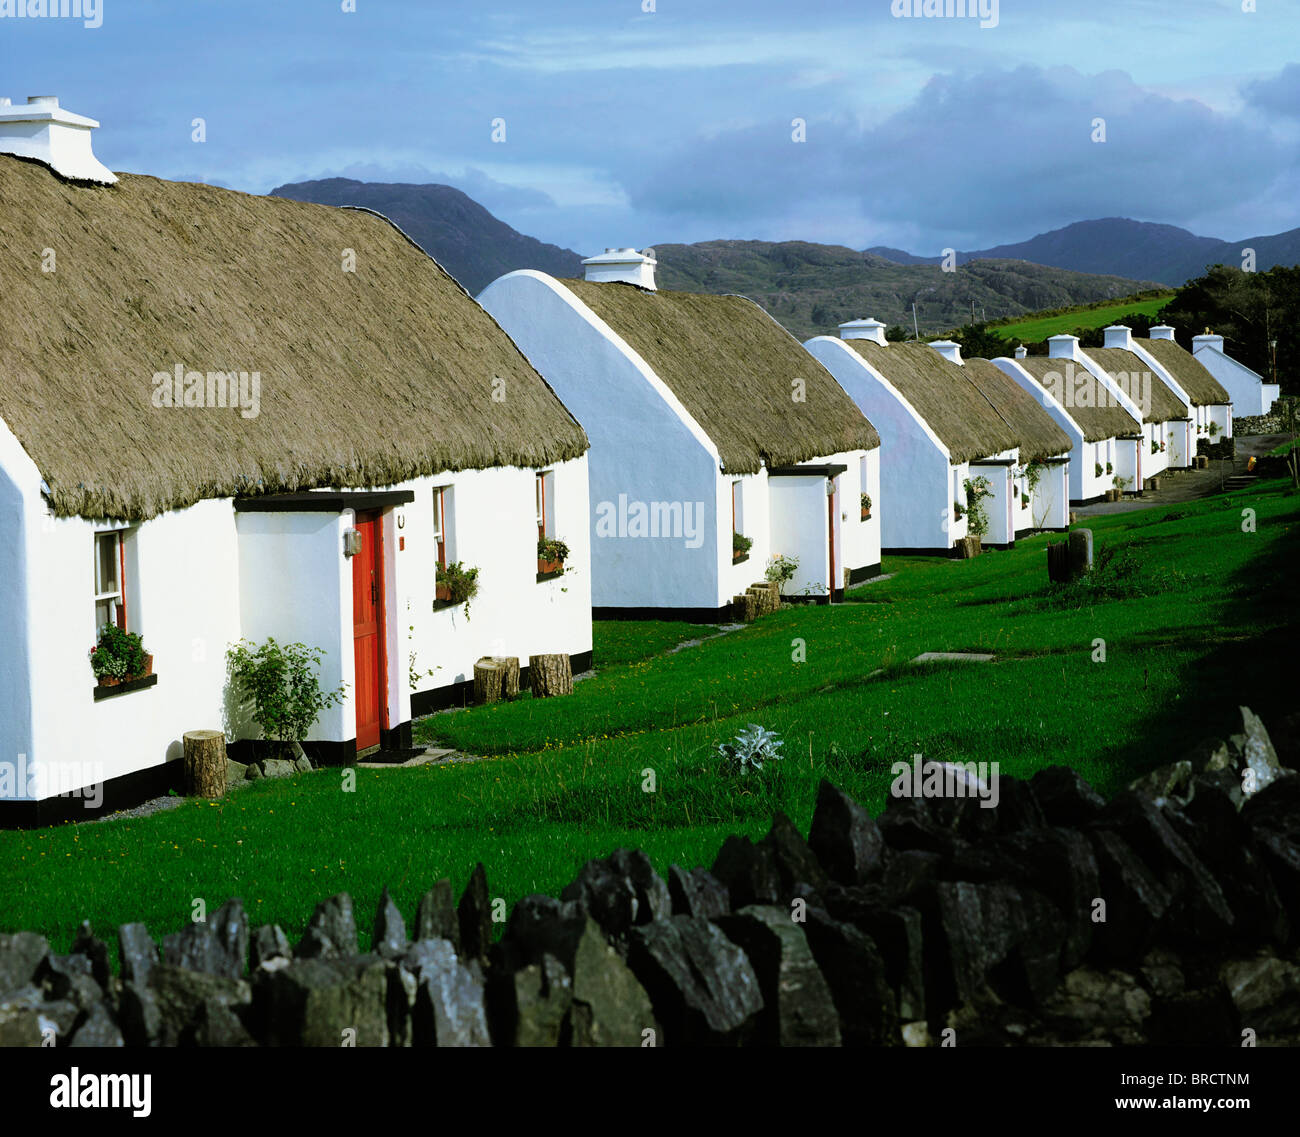 Tullycross Co Galway Ireland Holiday Cottages Stock Photo